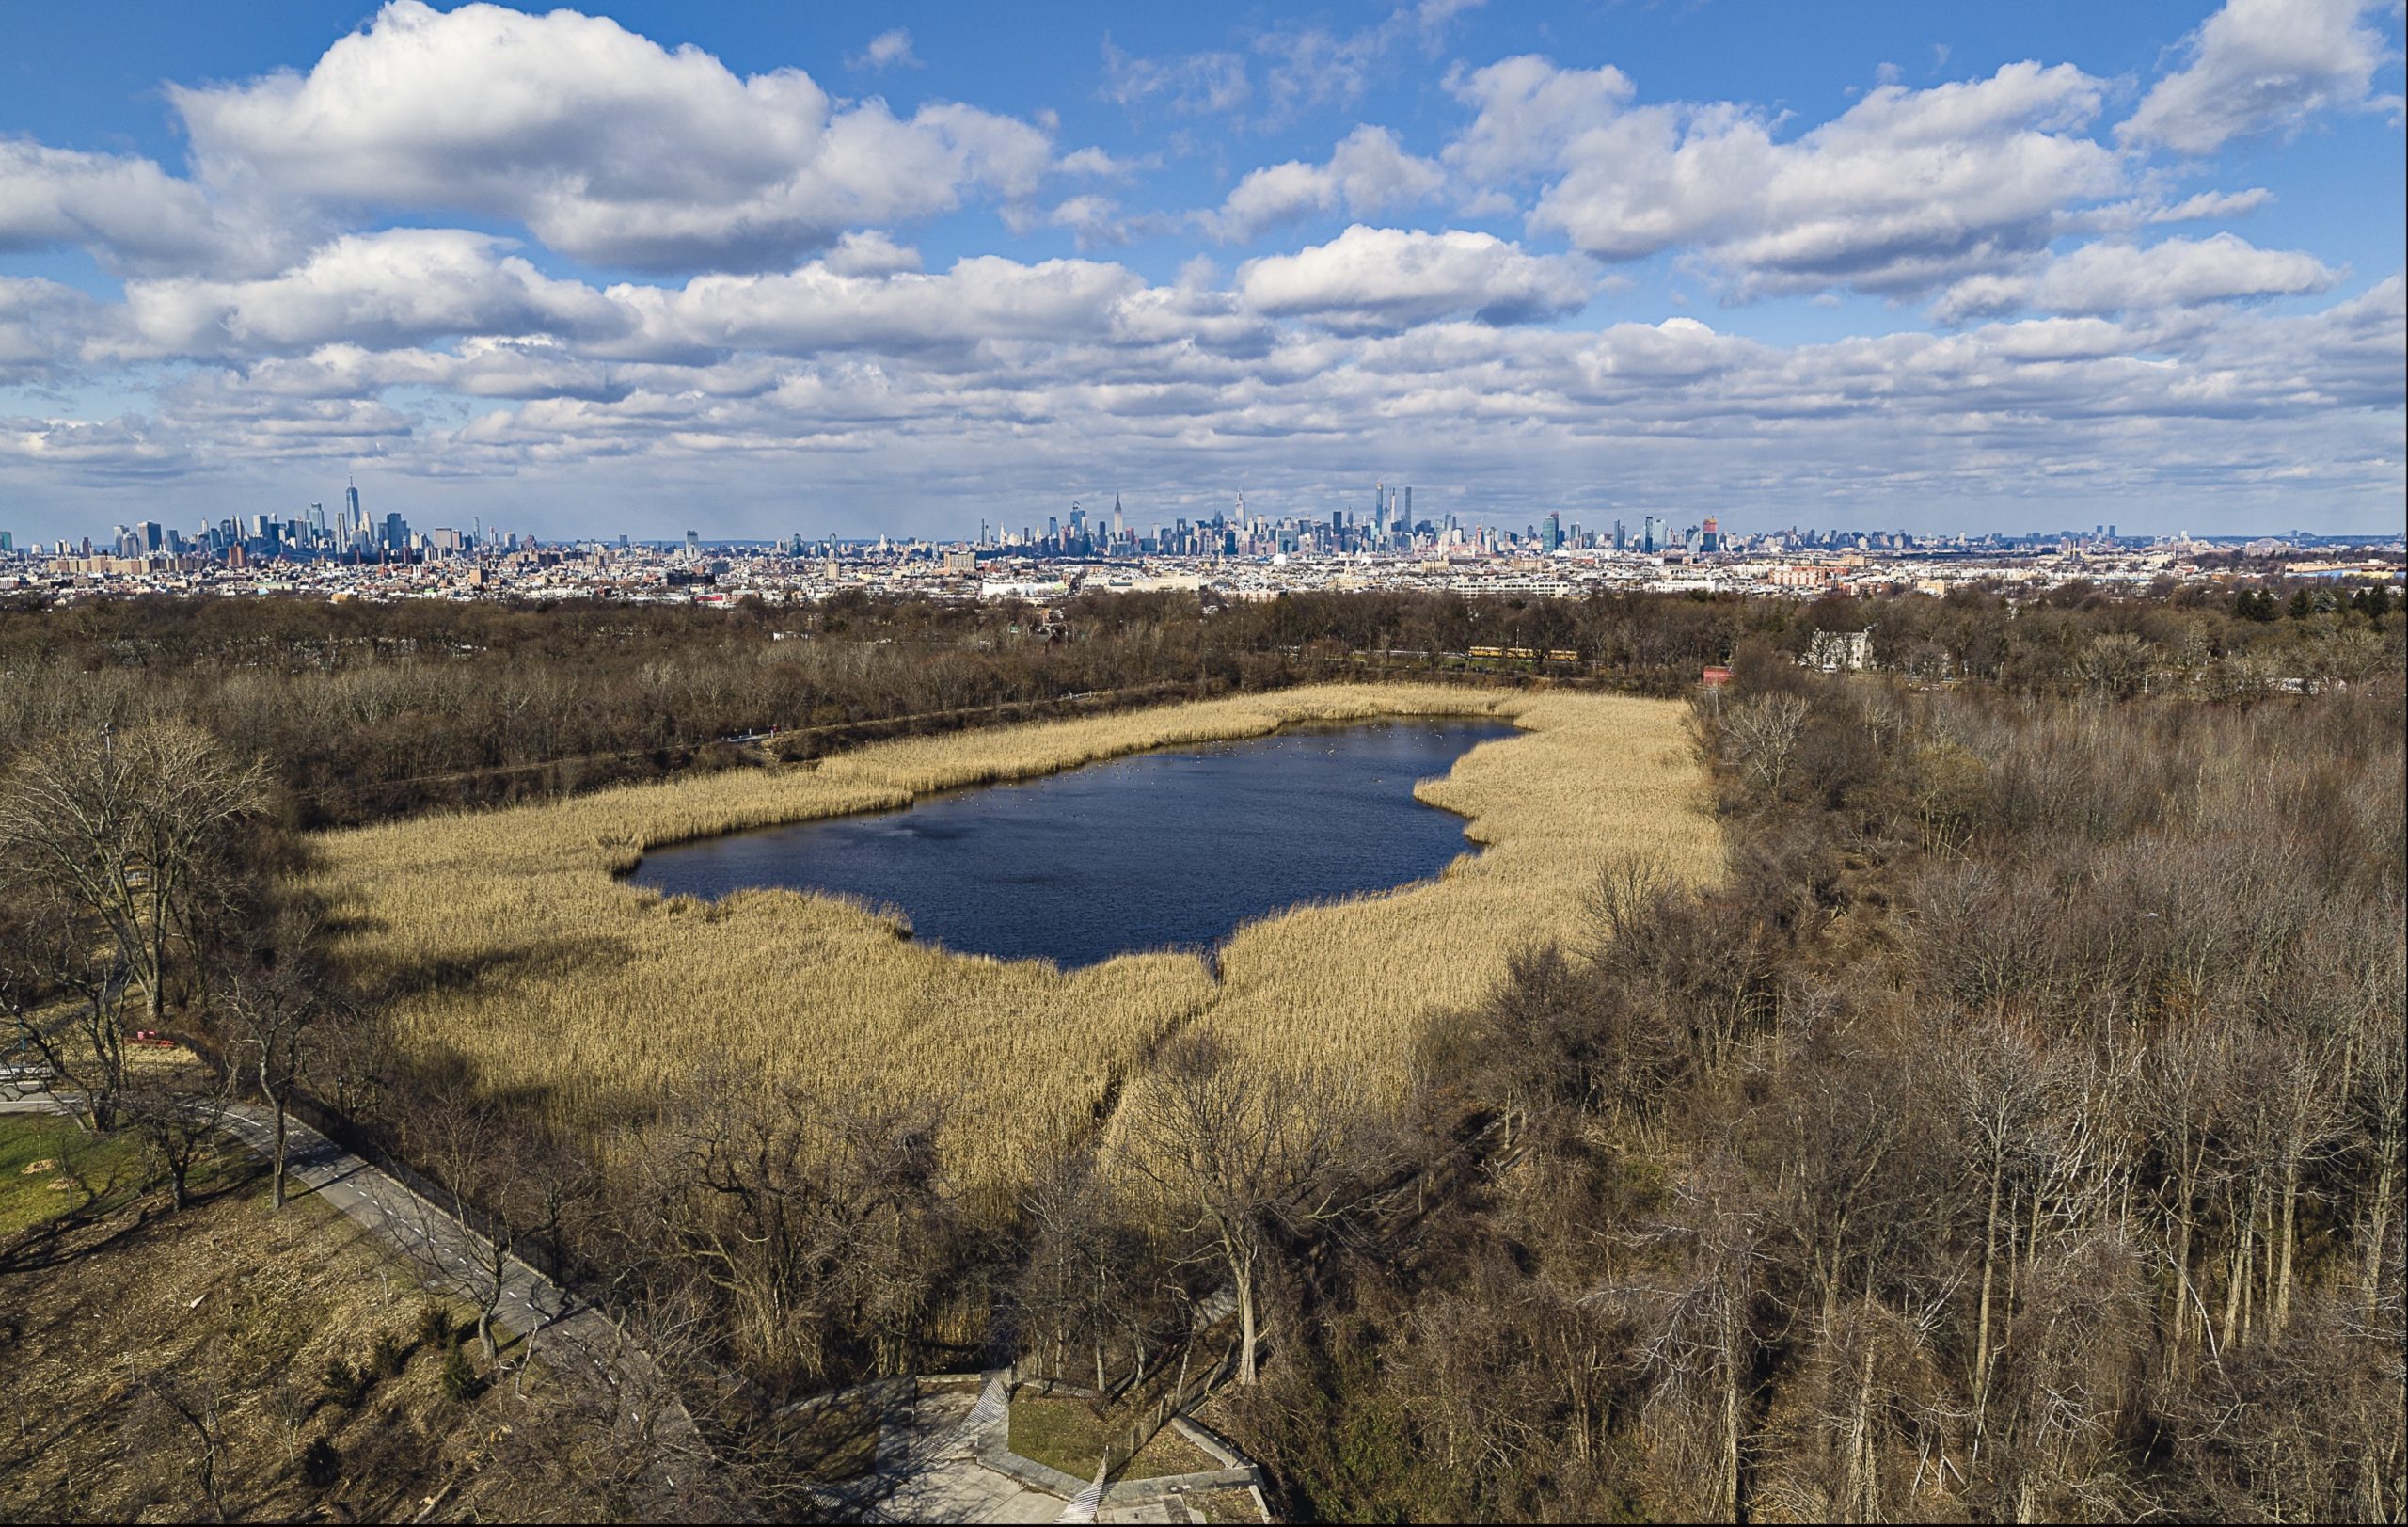 A water reservoir surrounded by a forest of bare trees. The water is a pristine, dark blue. In the background is the skyline of New York City against a cloudy blue sky.